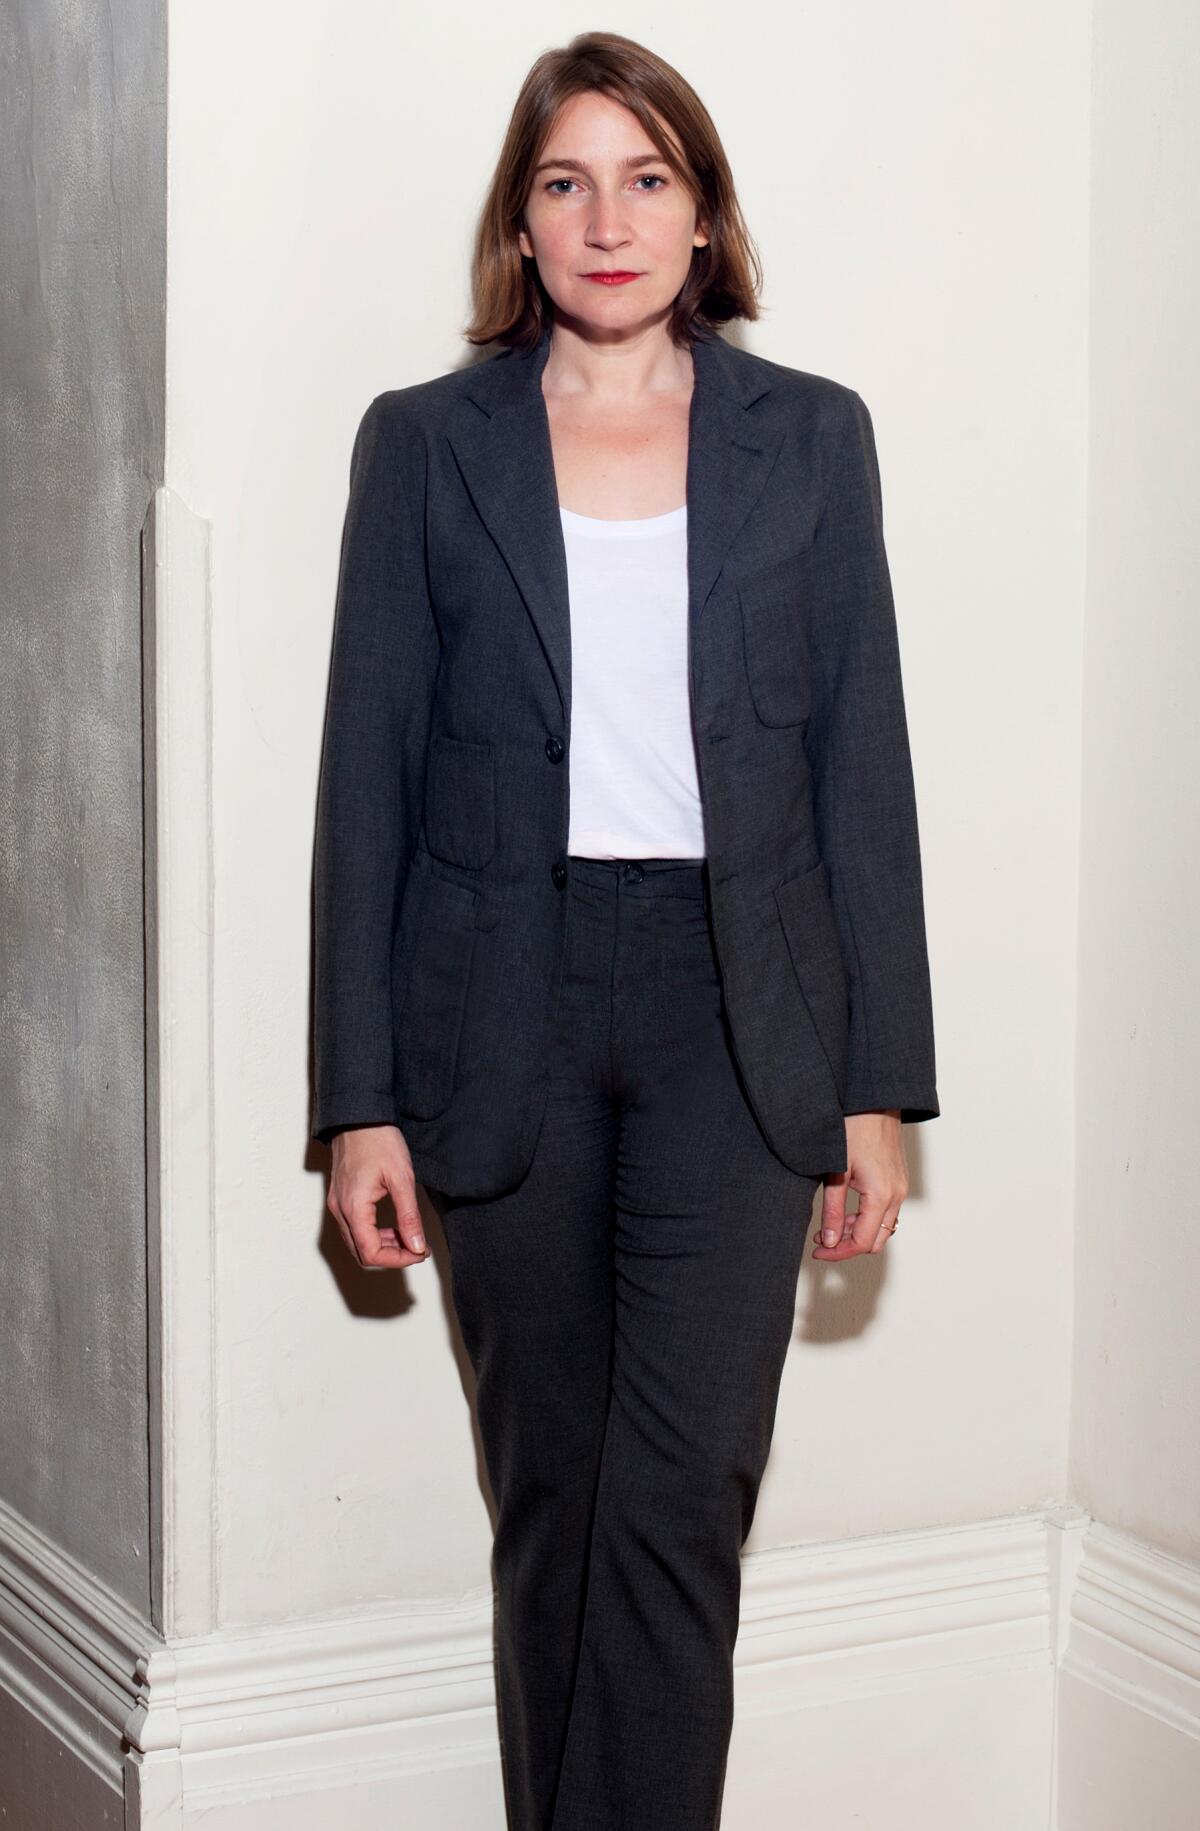 Author Sheila Heti, dressed in a suit, stands in a corner against a white wall with baseboards.